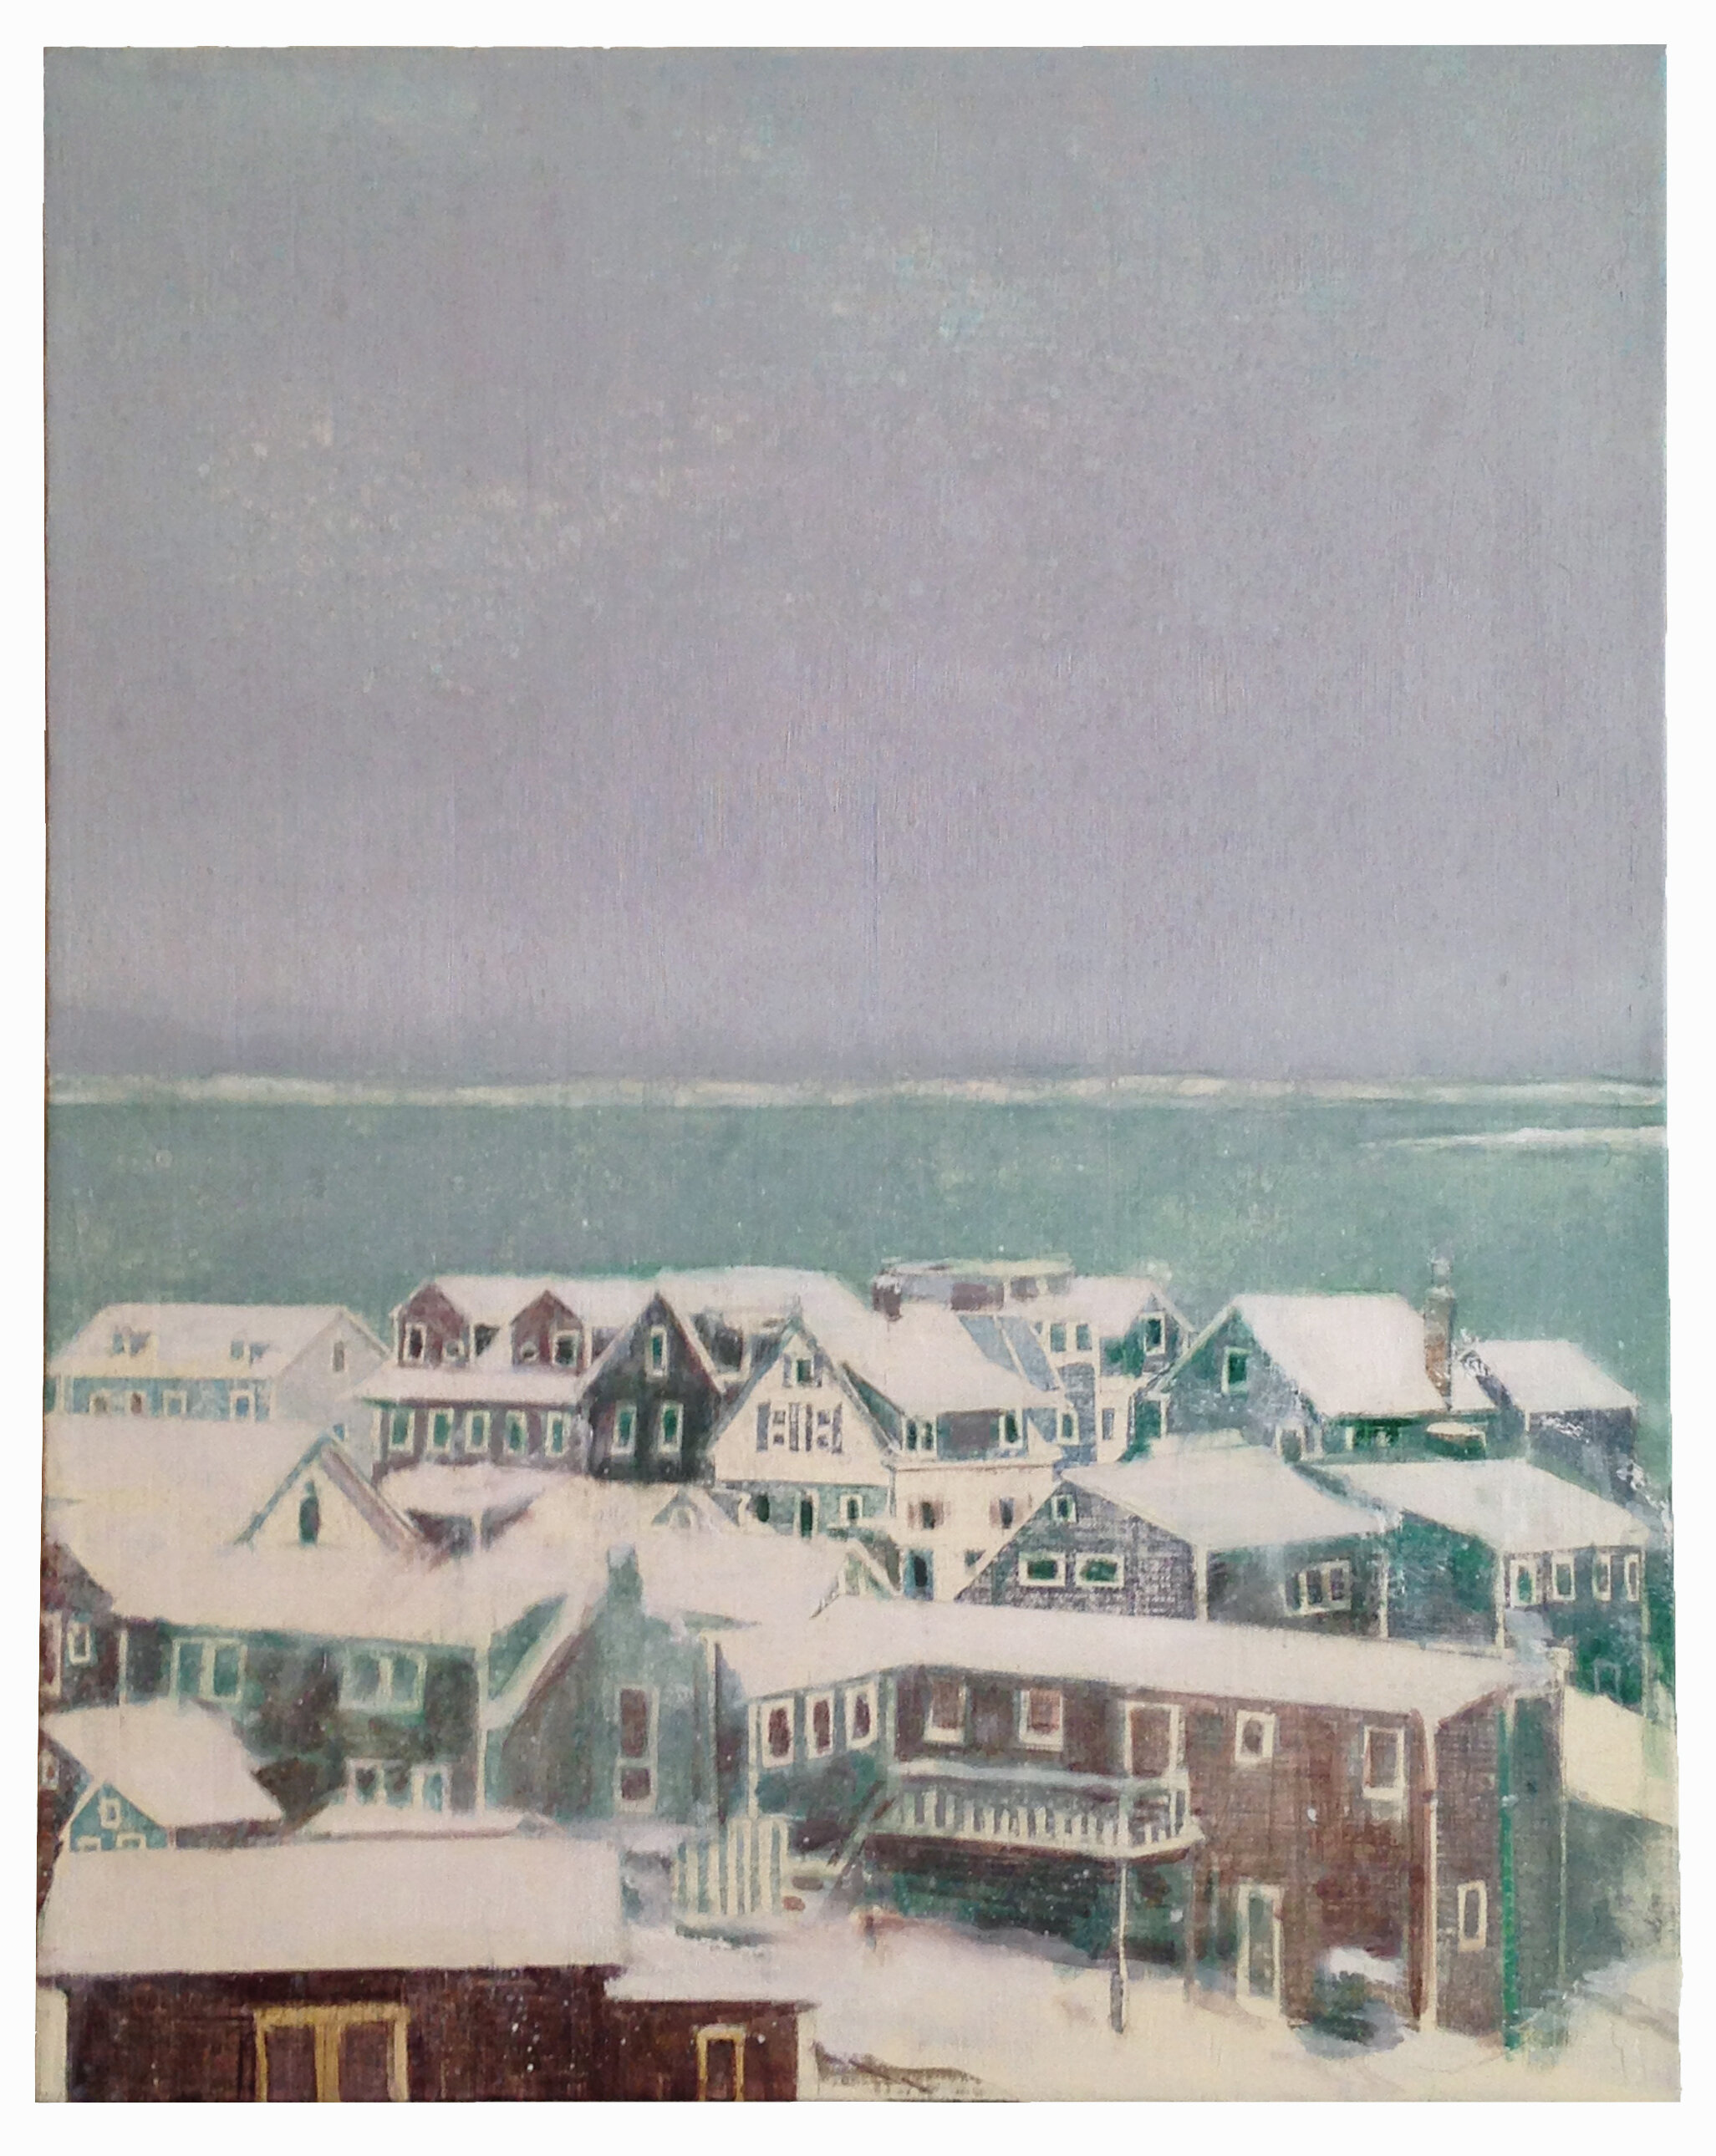  Provincetown Snow 24 x 19 inches Oil on linen 2017 